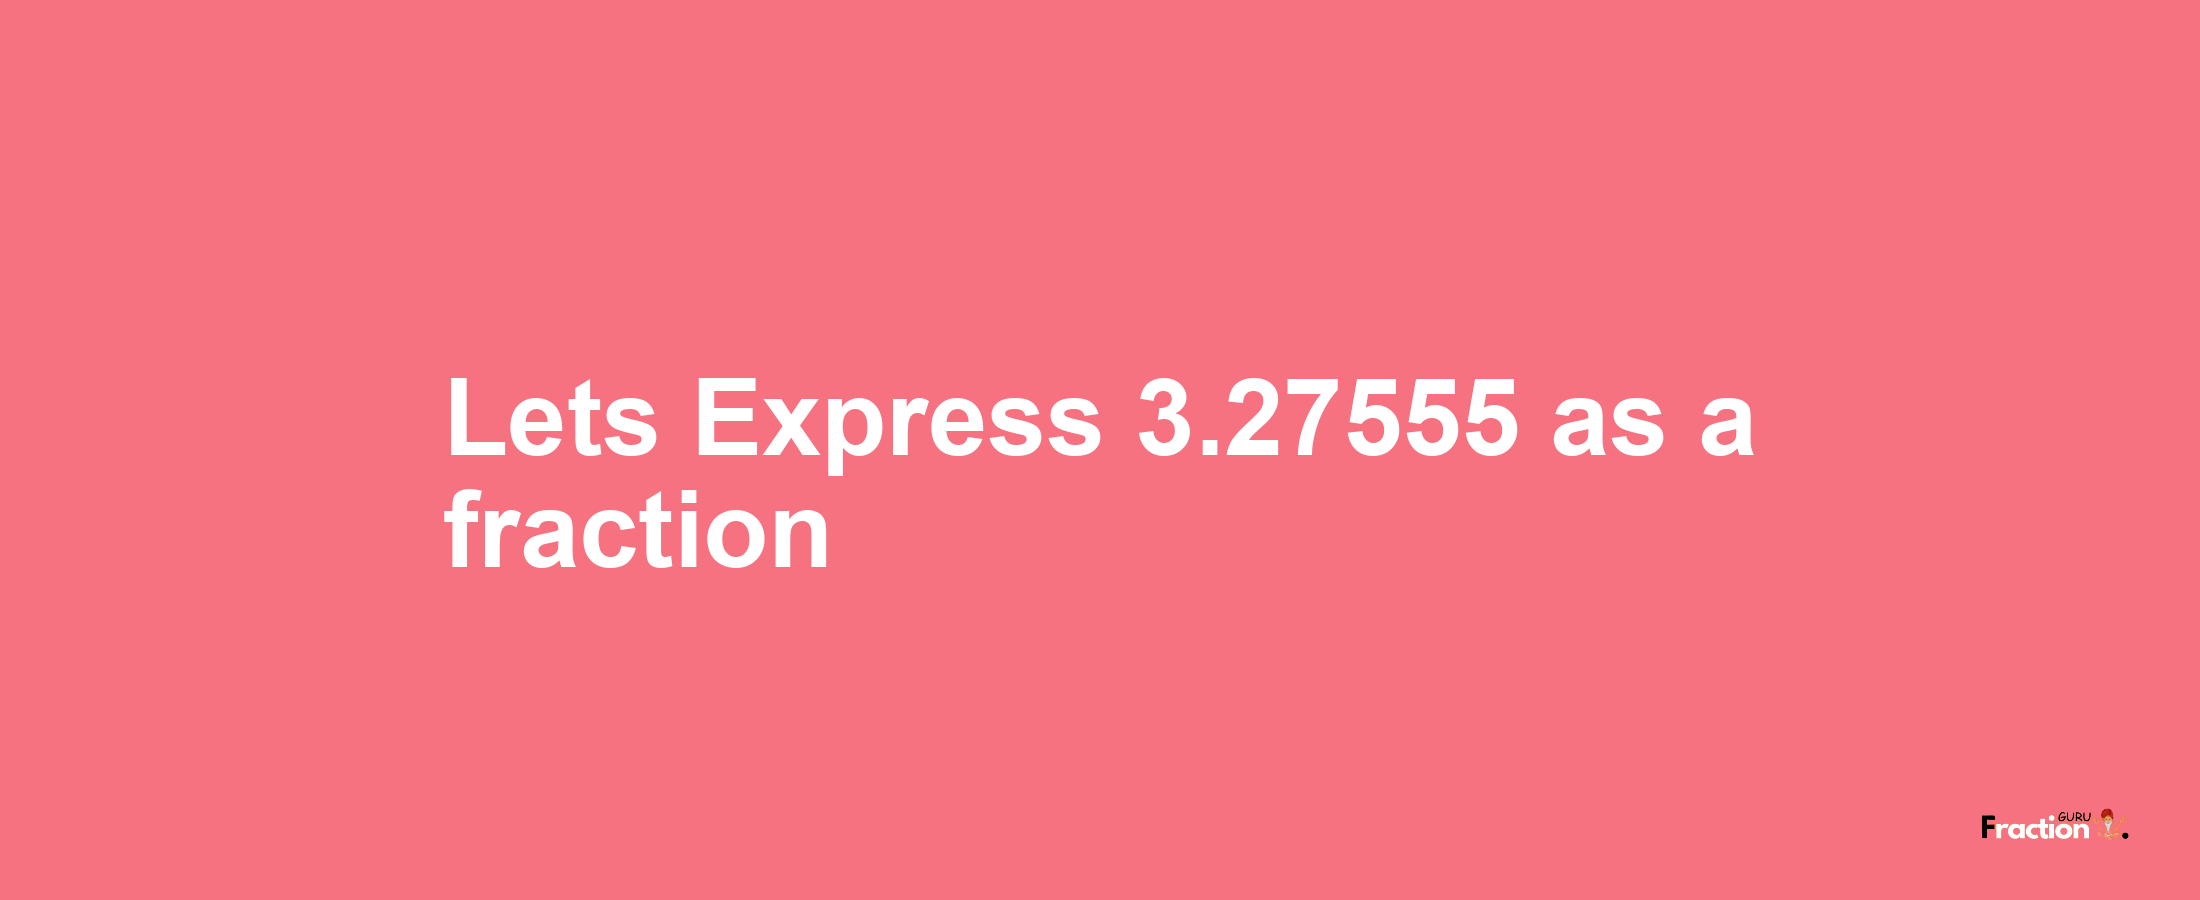 Lets Express 3.27555 as afraction